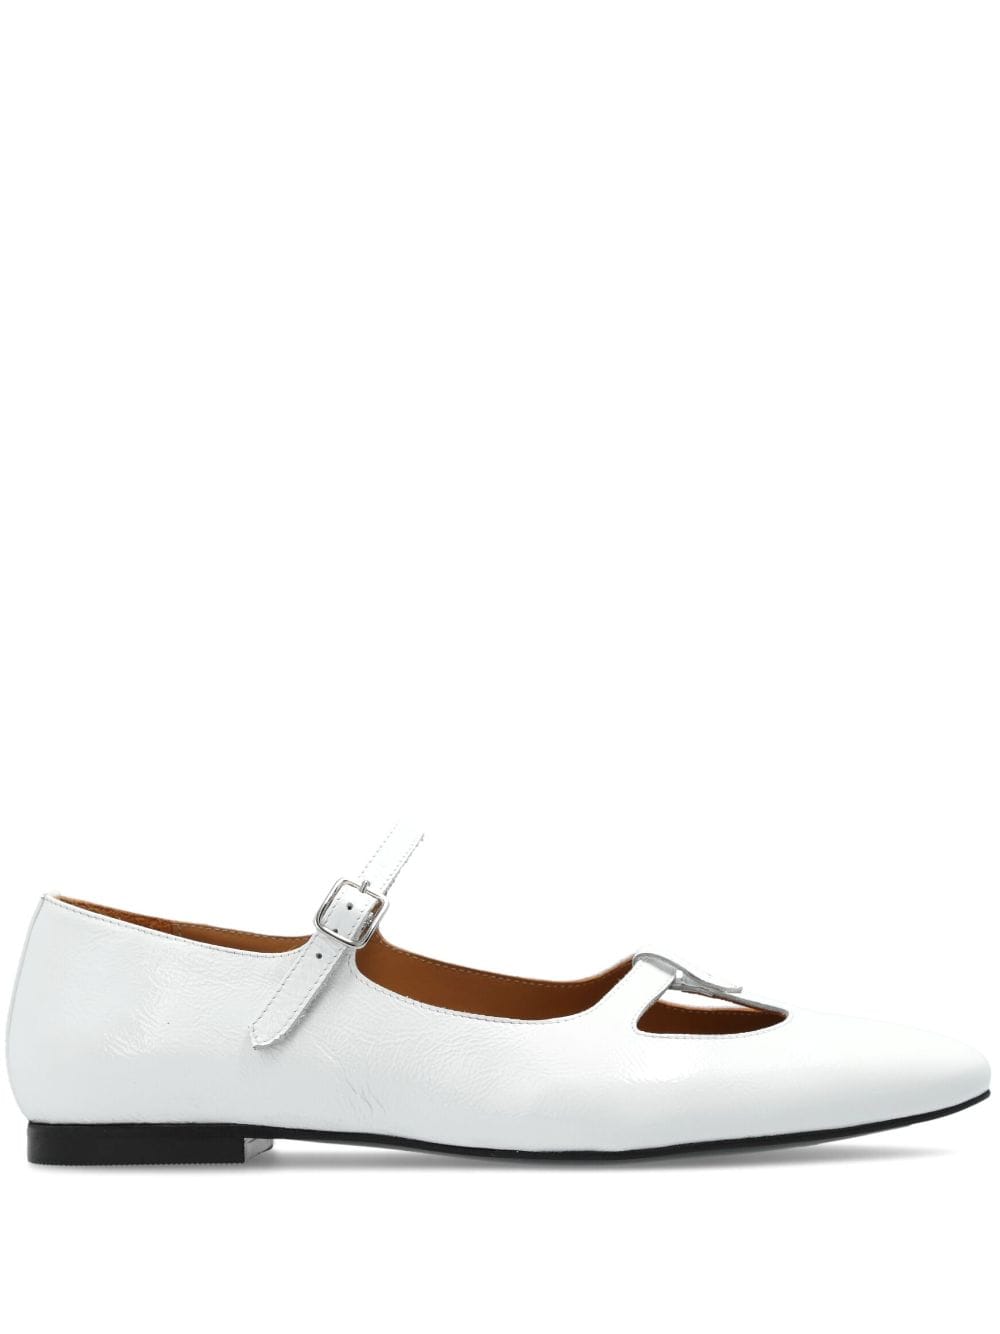 Apc Katie Leather Ballerina Shoes In White